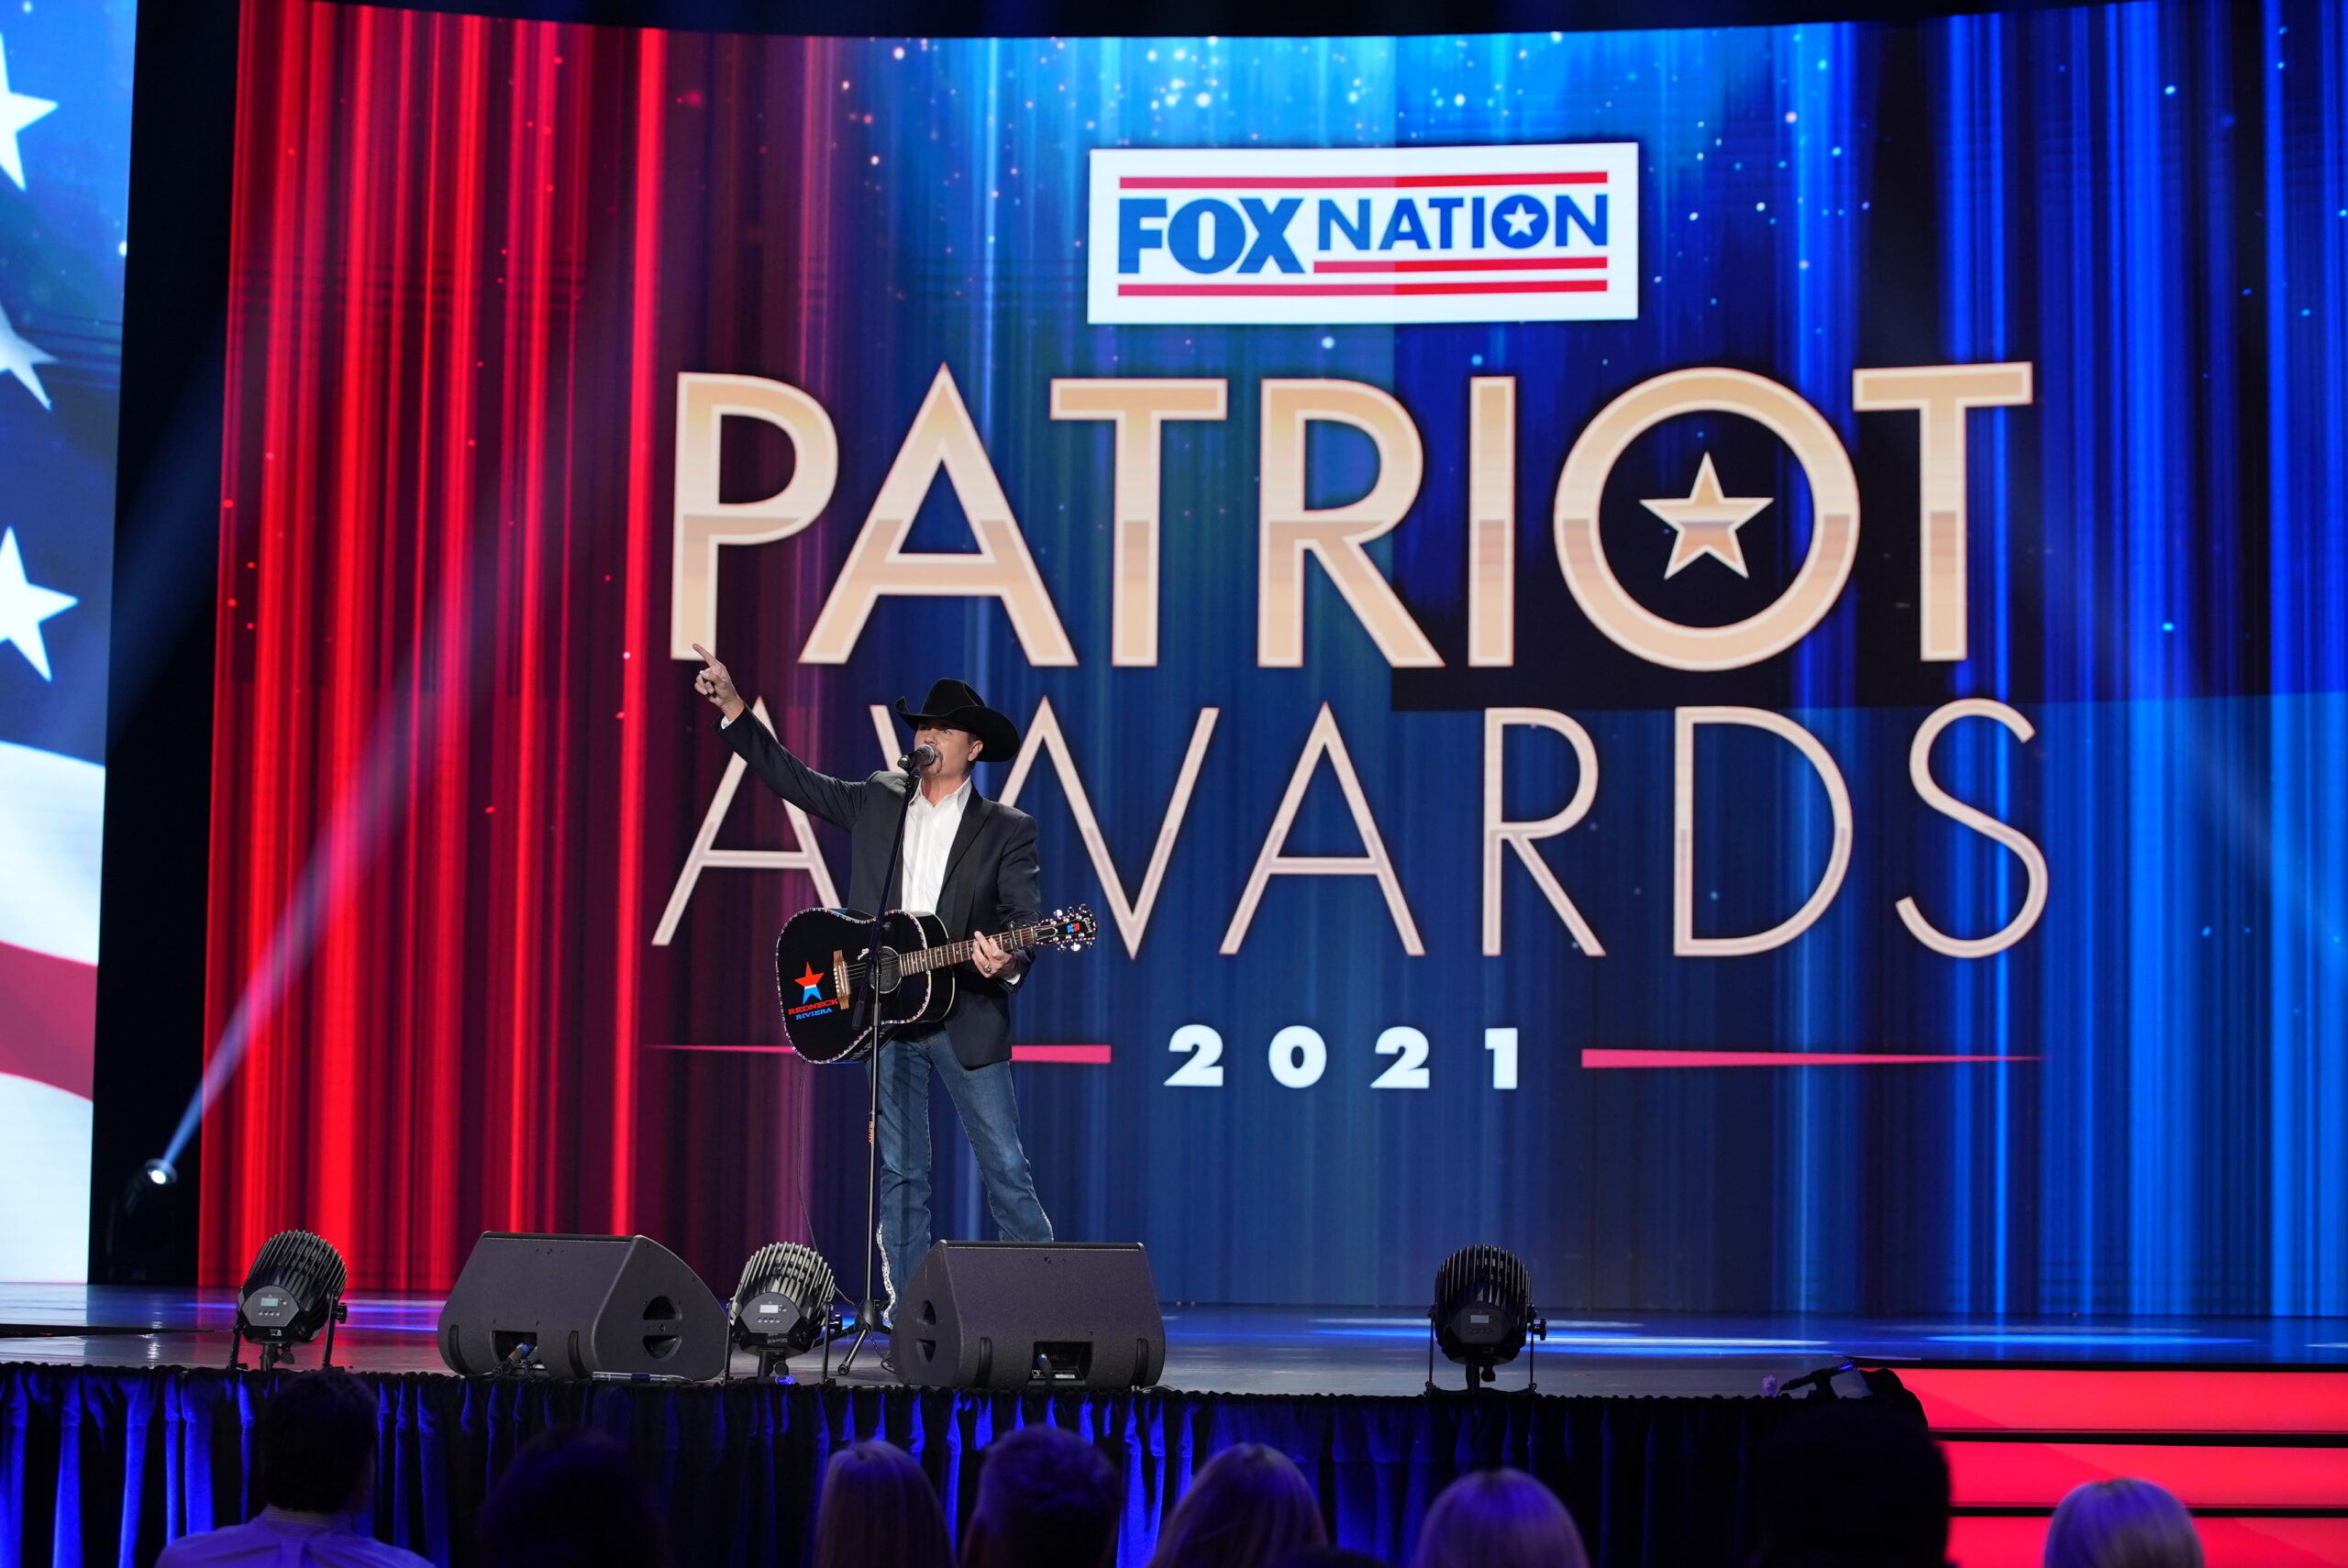 Fox News Stars Turn Out For Third Annual Patriot Awards 